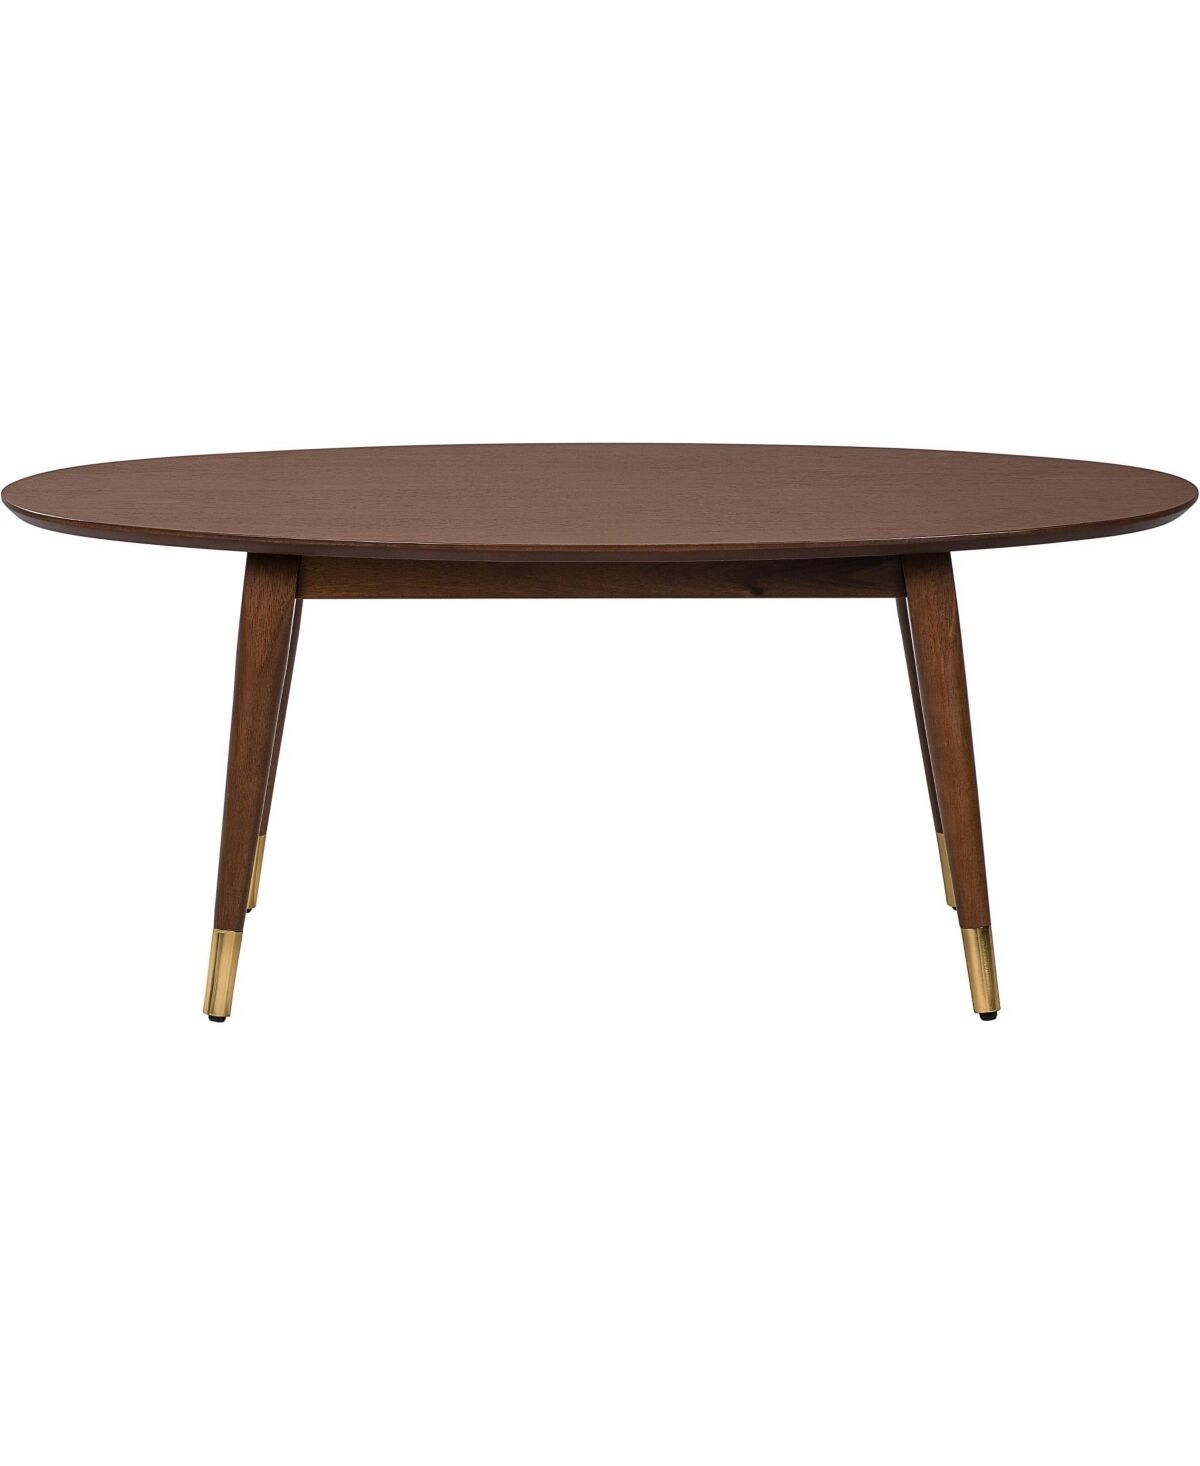 Elle Decor Clemintine Coffee Table - Brown